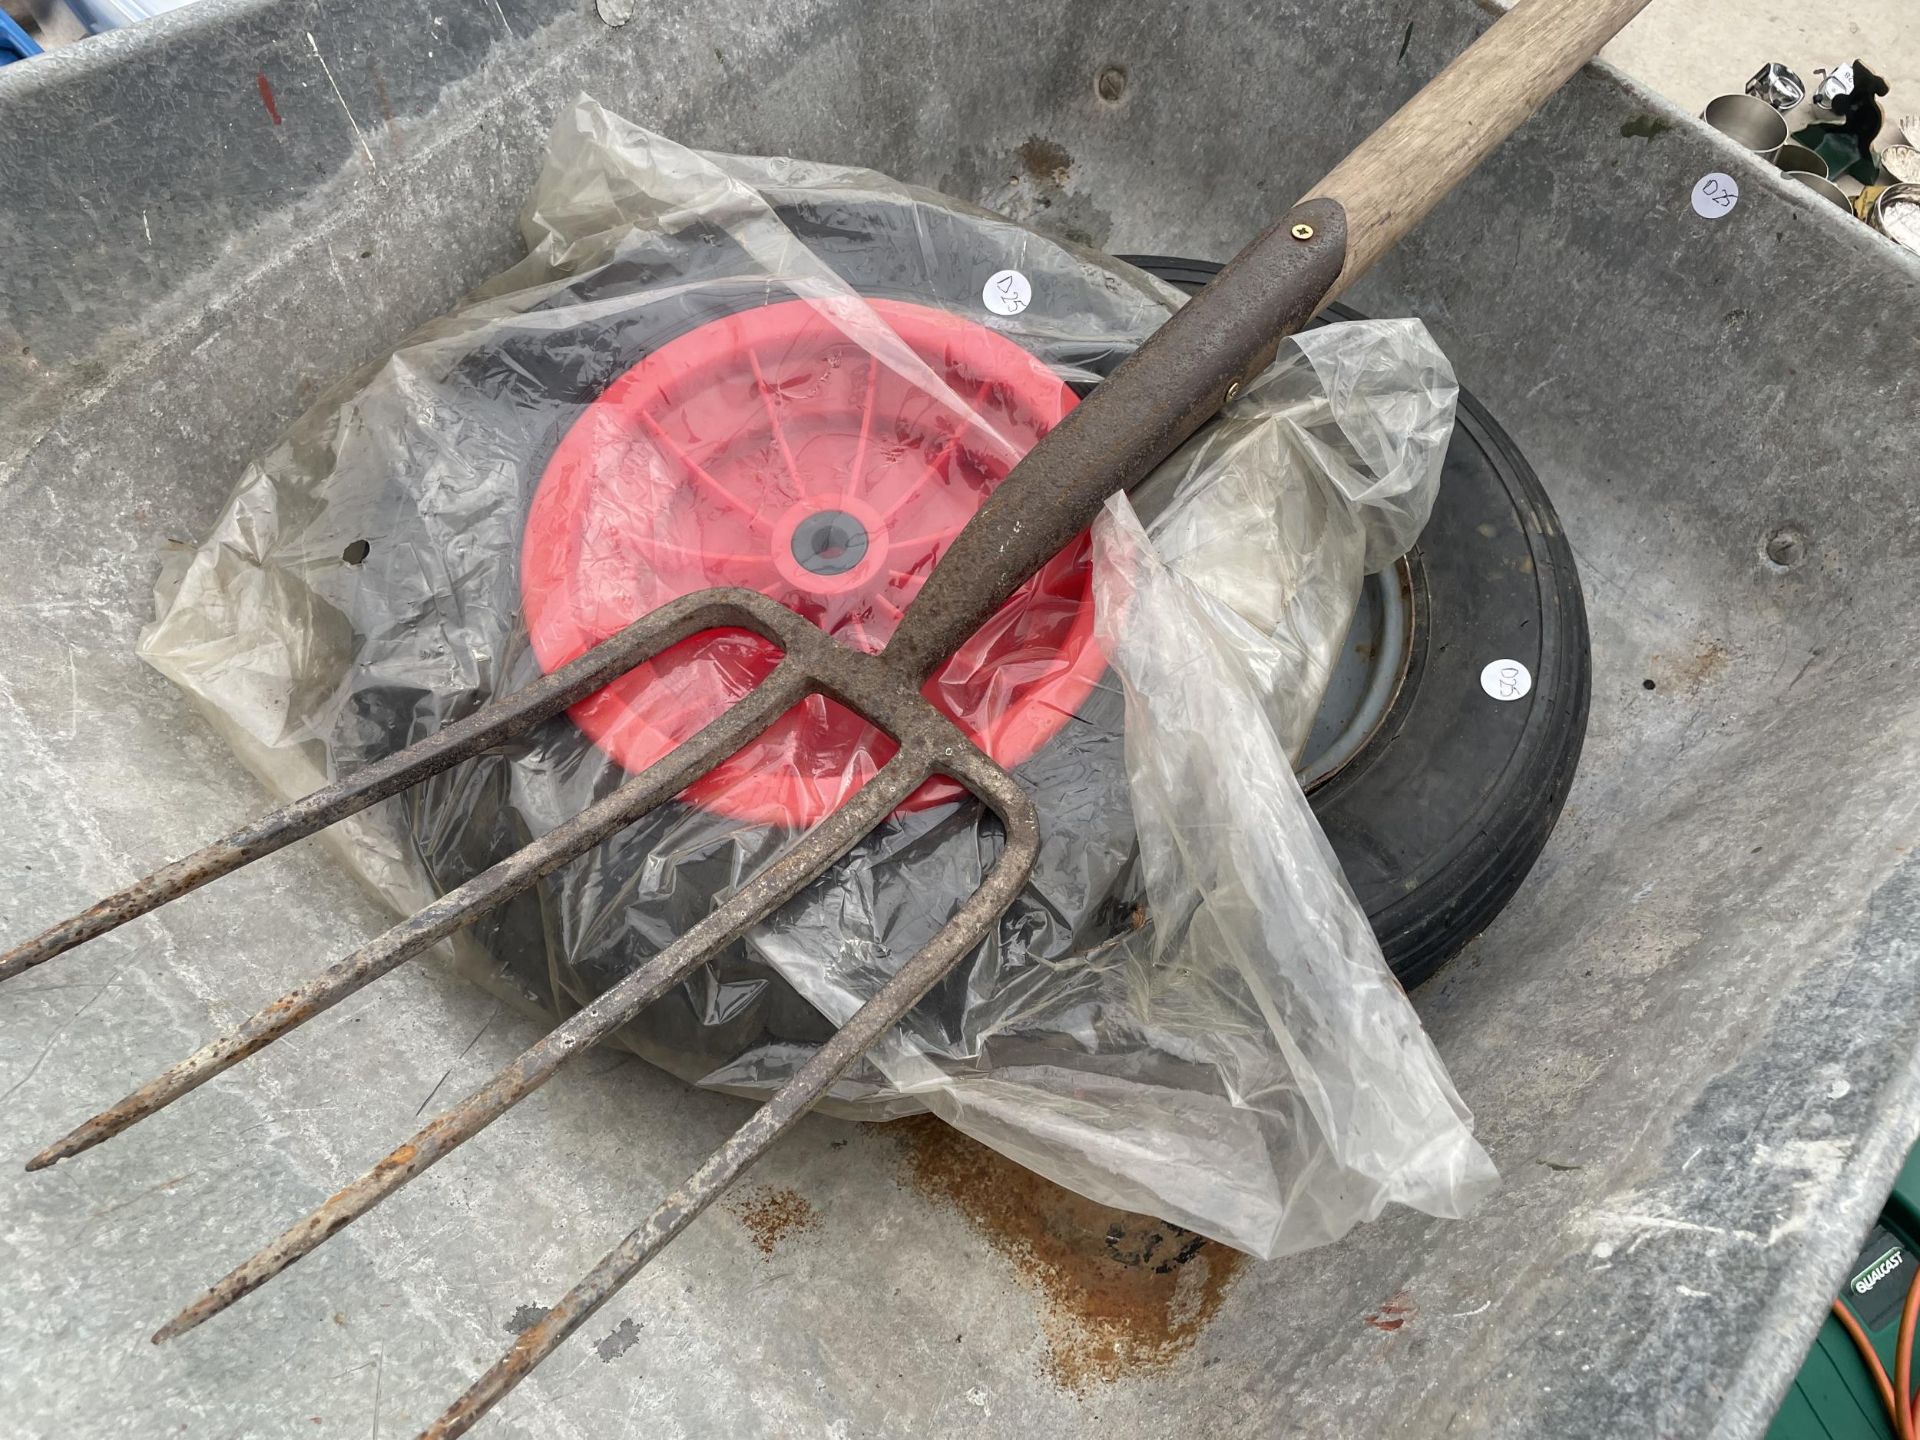 A WHEEL BARROW WITH TWO SPARE WHEELS AND A GARDEN FORK - Image 2 of 2